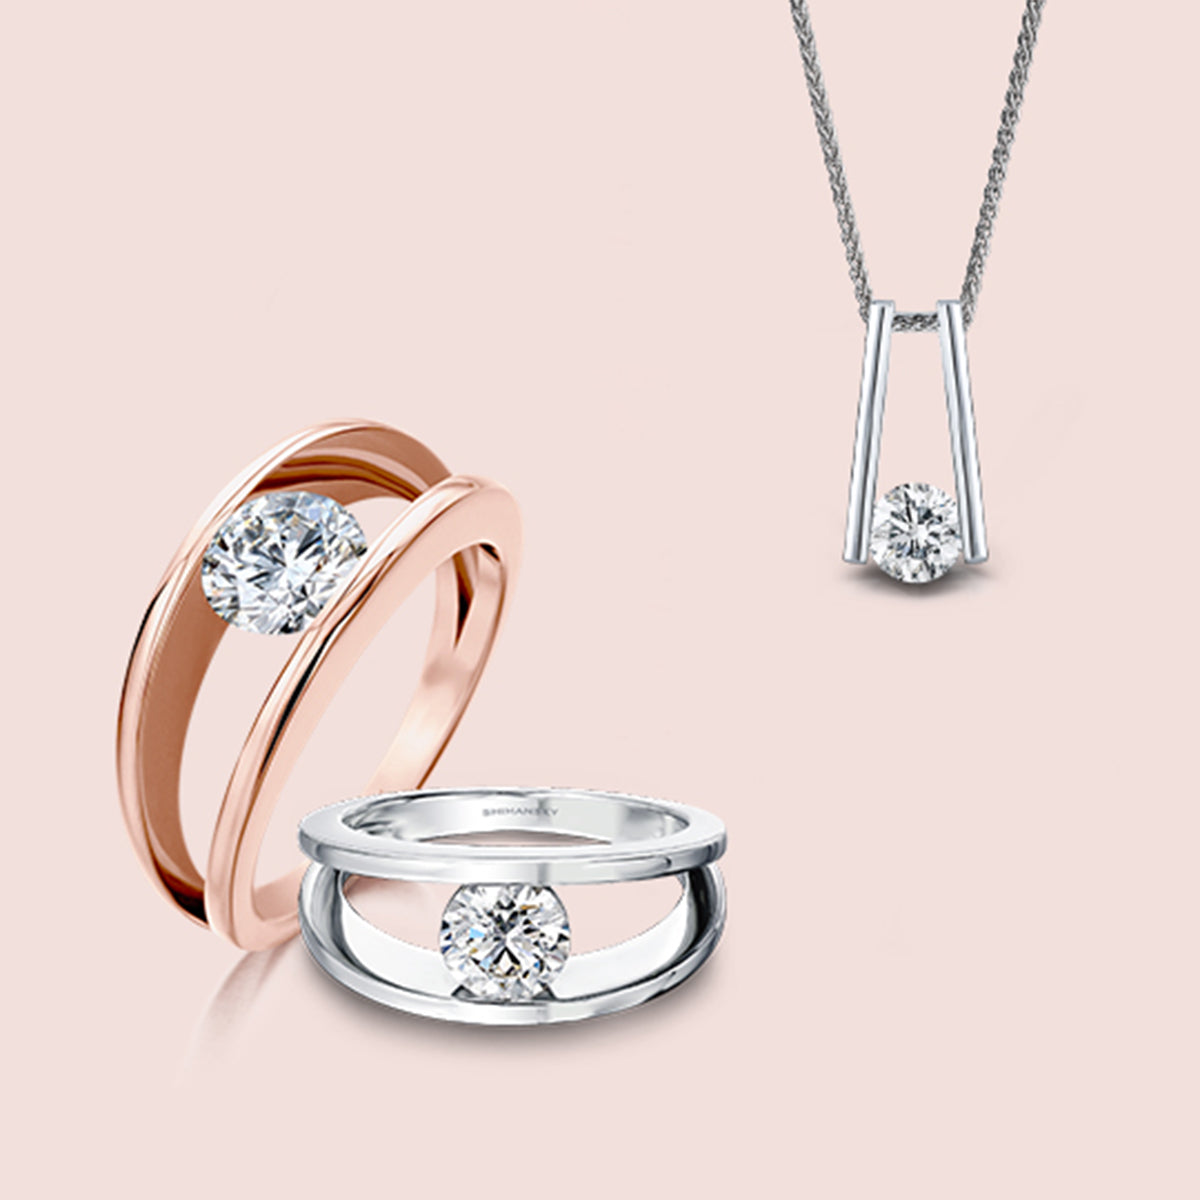 Shimansky Signature Millennium Collection Jewellery Rings and Pendant